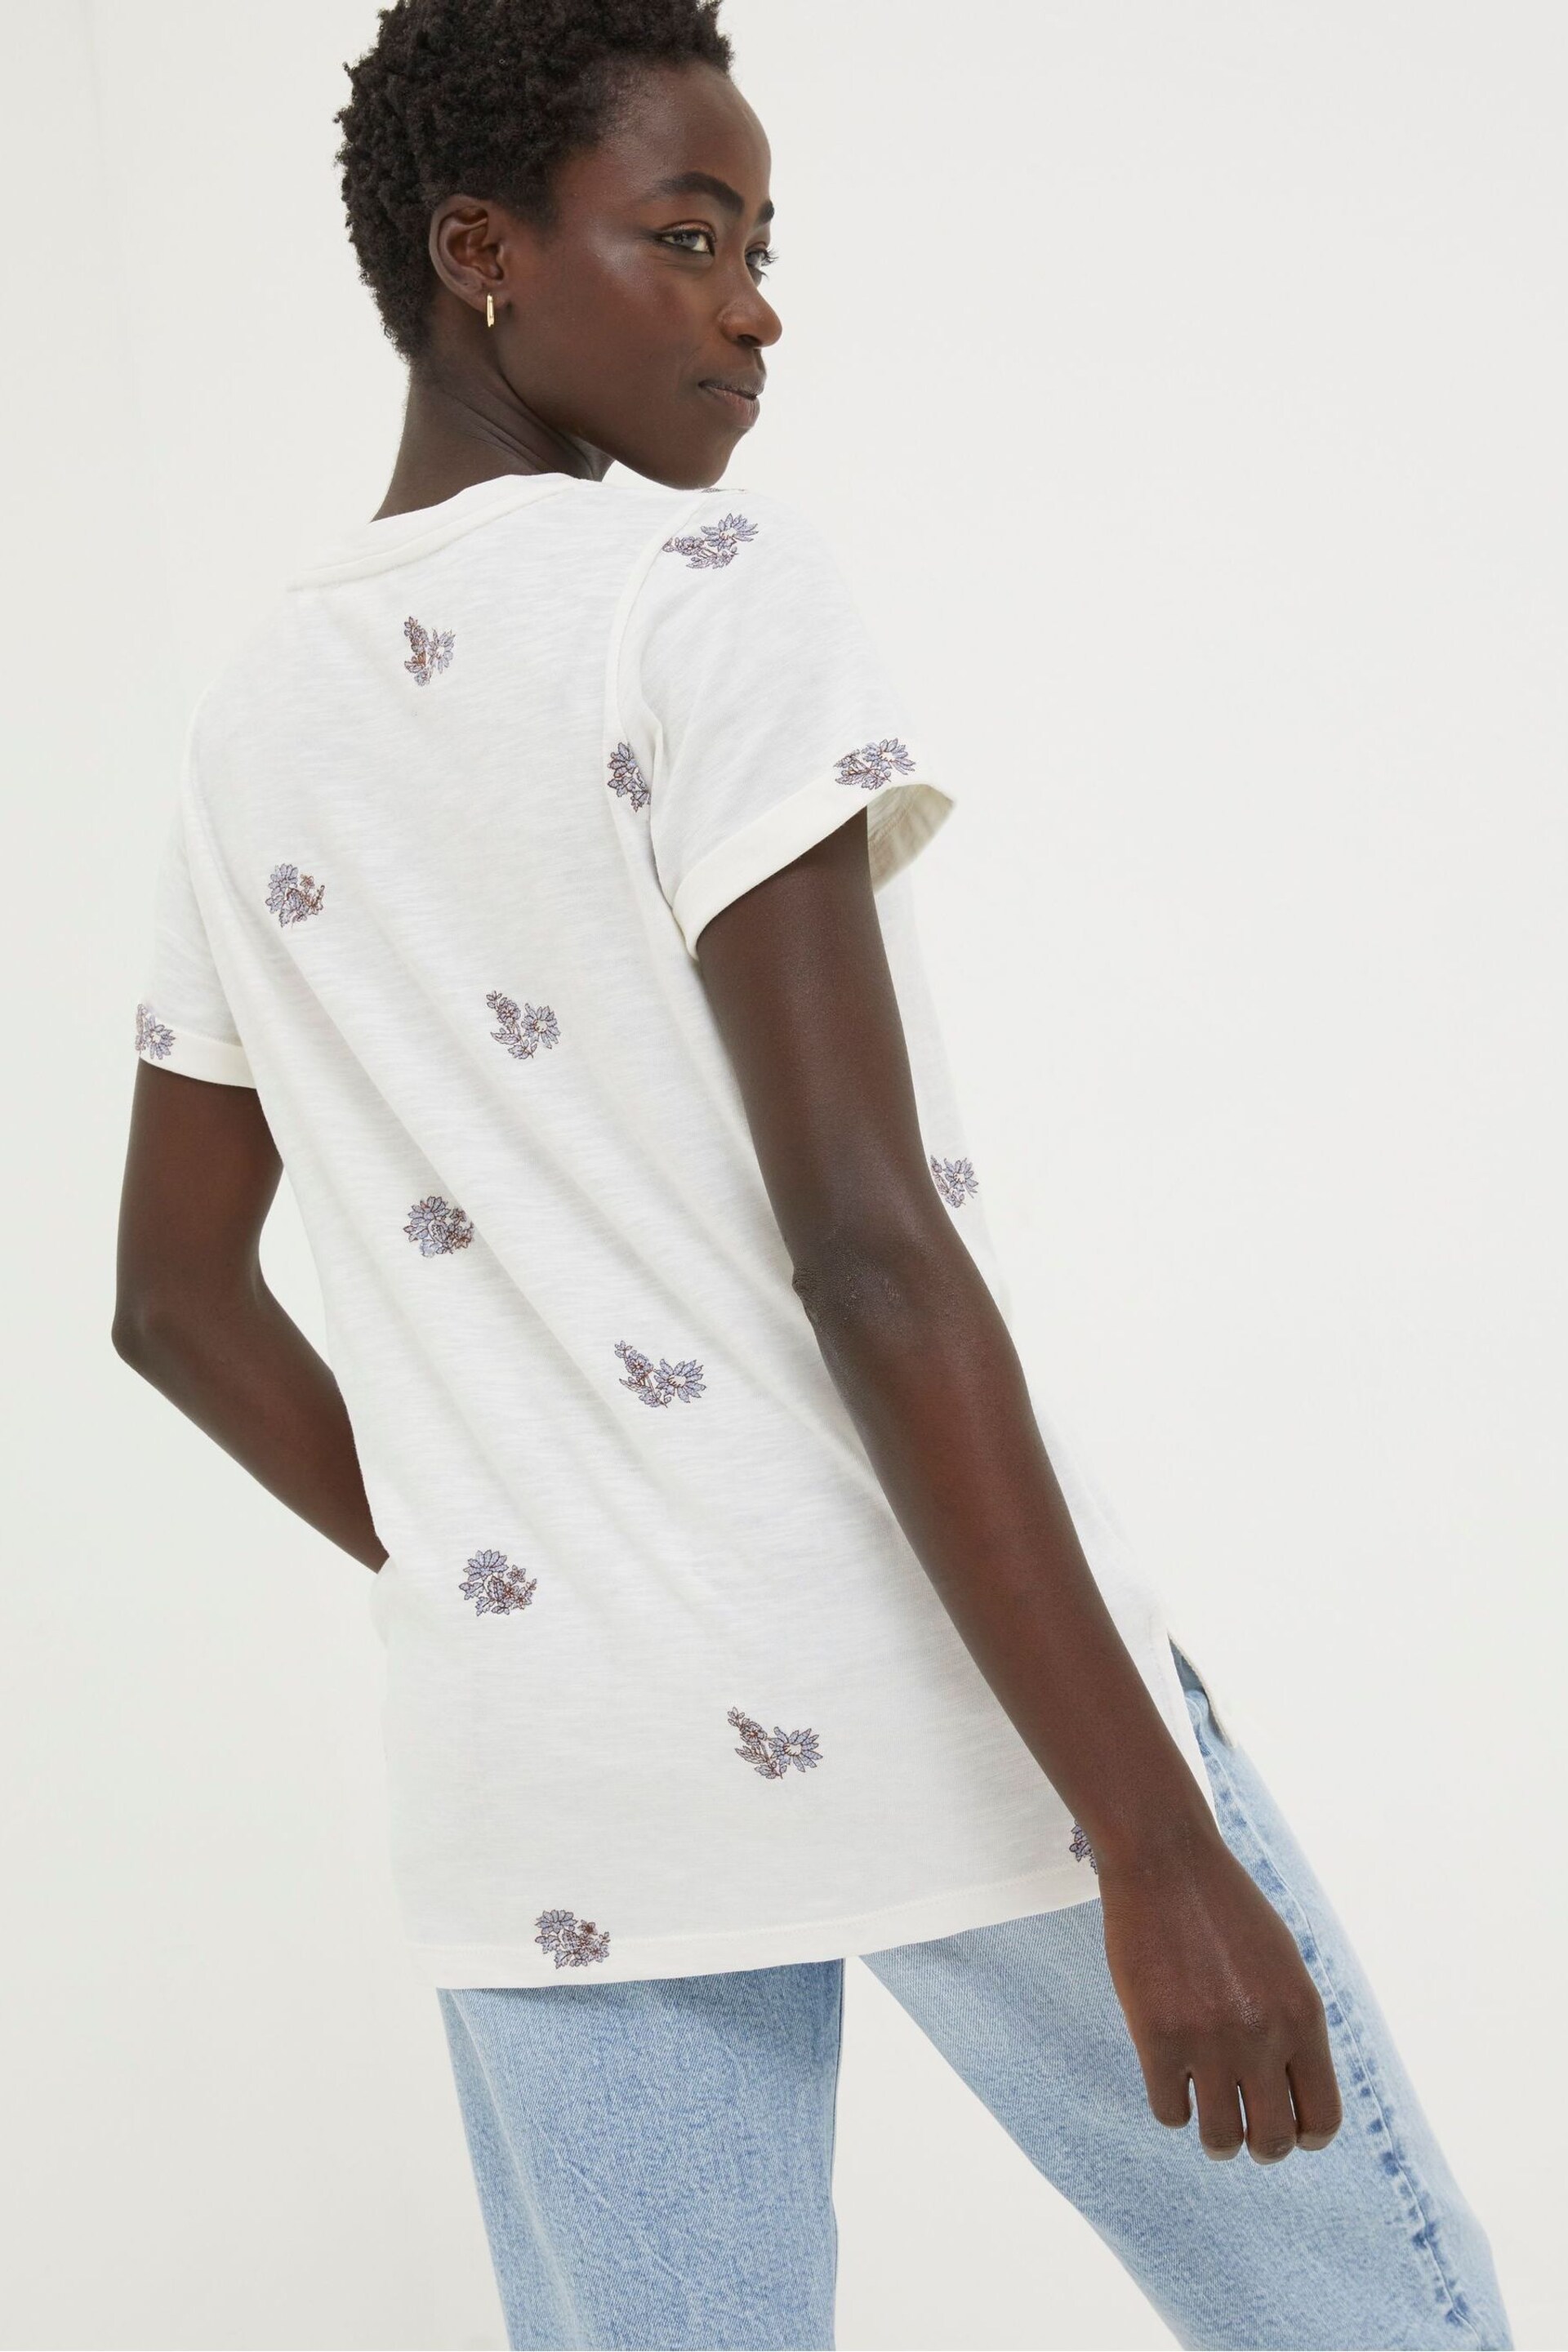 FatFace Natural Floral Embroidered T-Shirt - Image 2 of 4